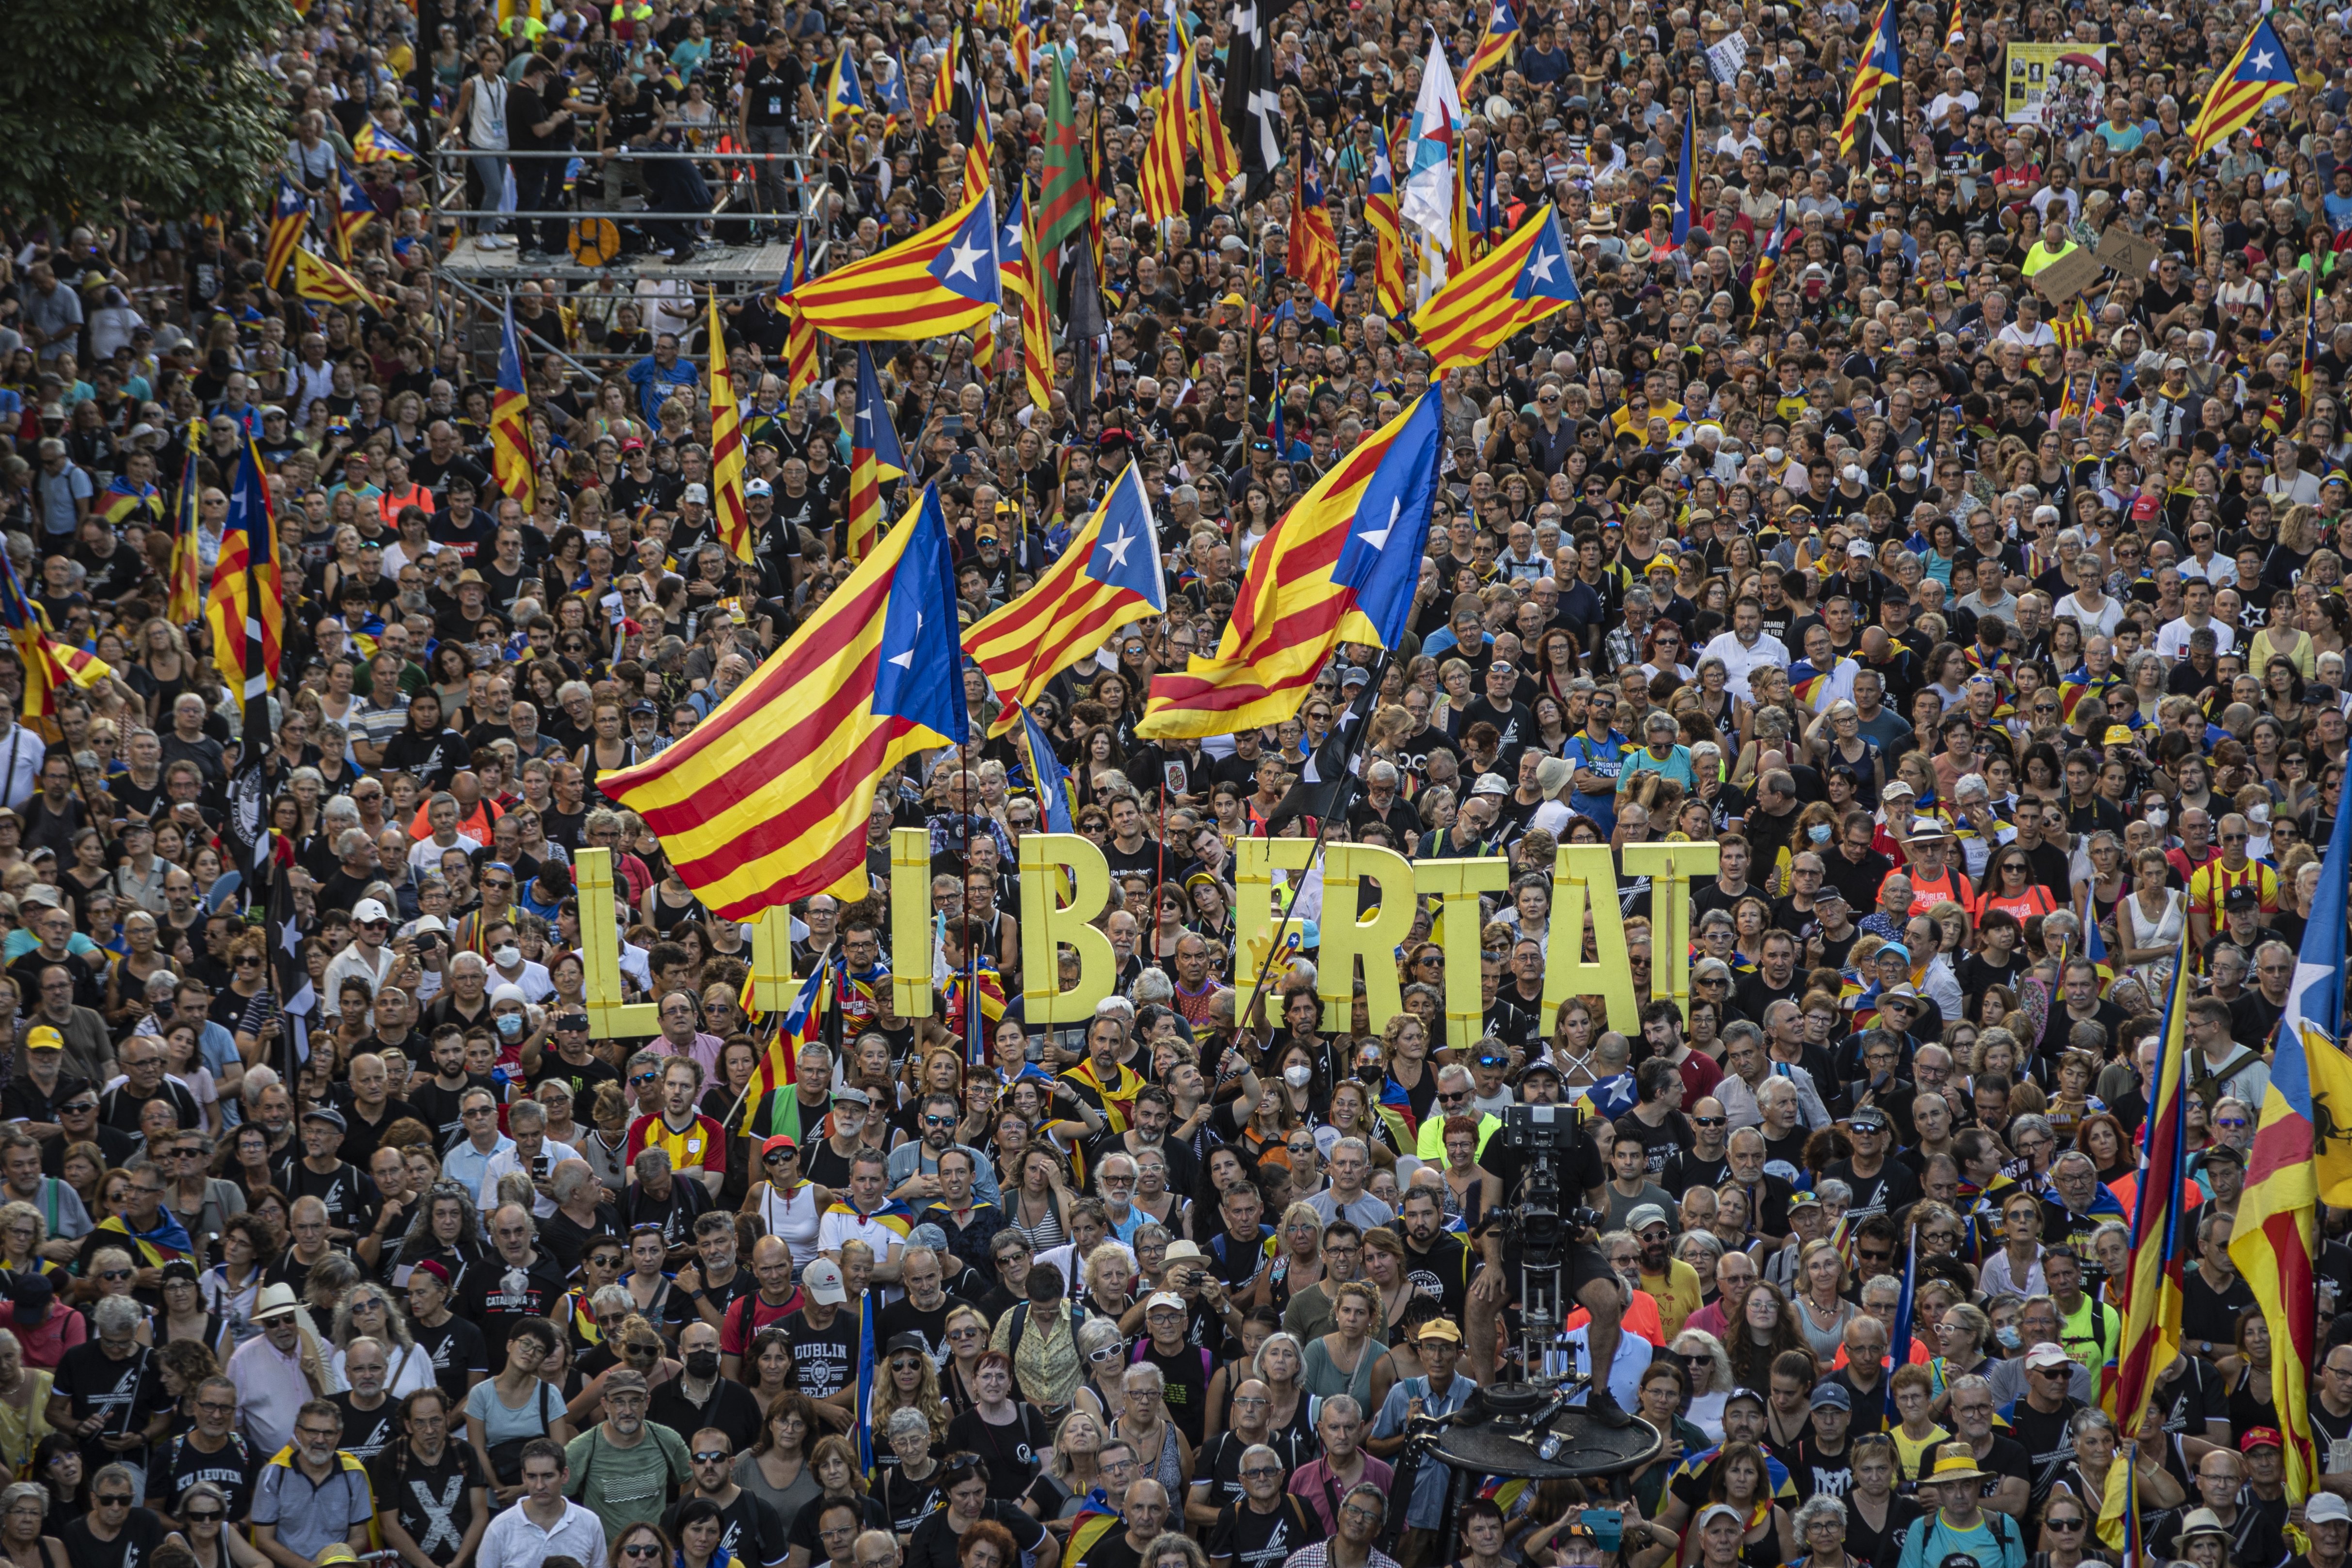 The ANC challenges ERC as the Catalan independence movement resists on the street